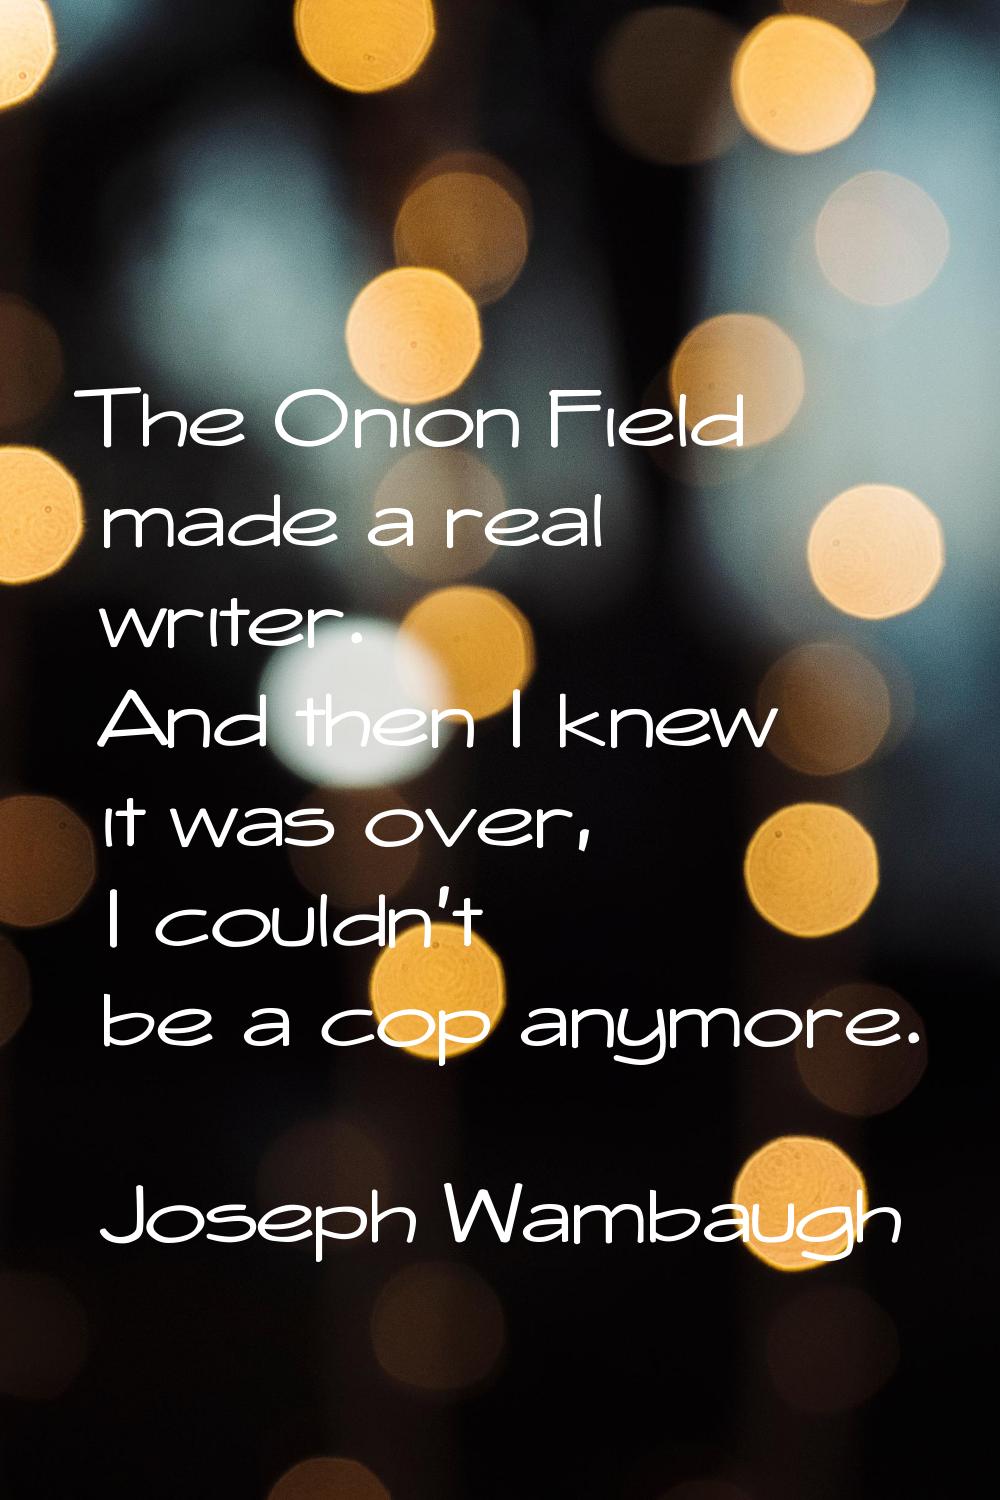 The Onion Field made a real writer. And then I knew it was over, I couldn't be a cop anymore.